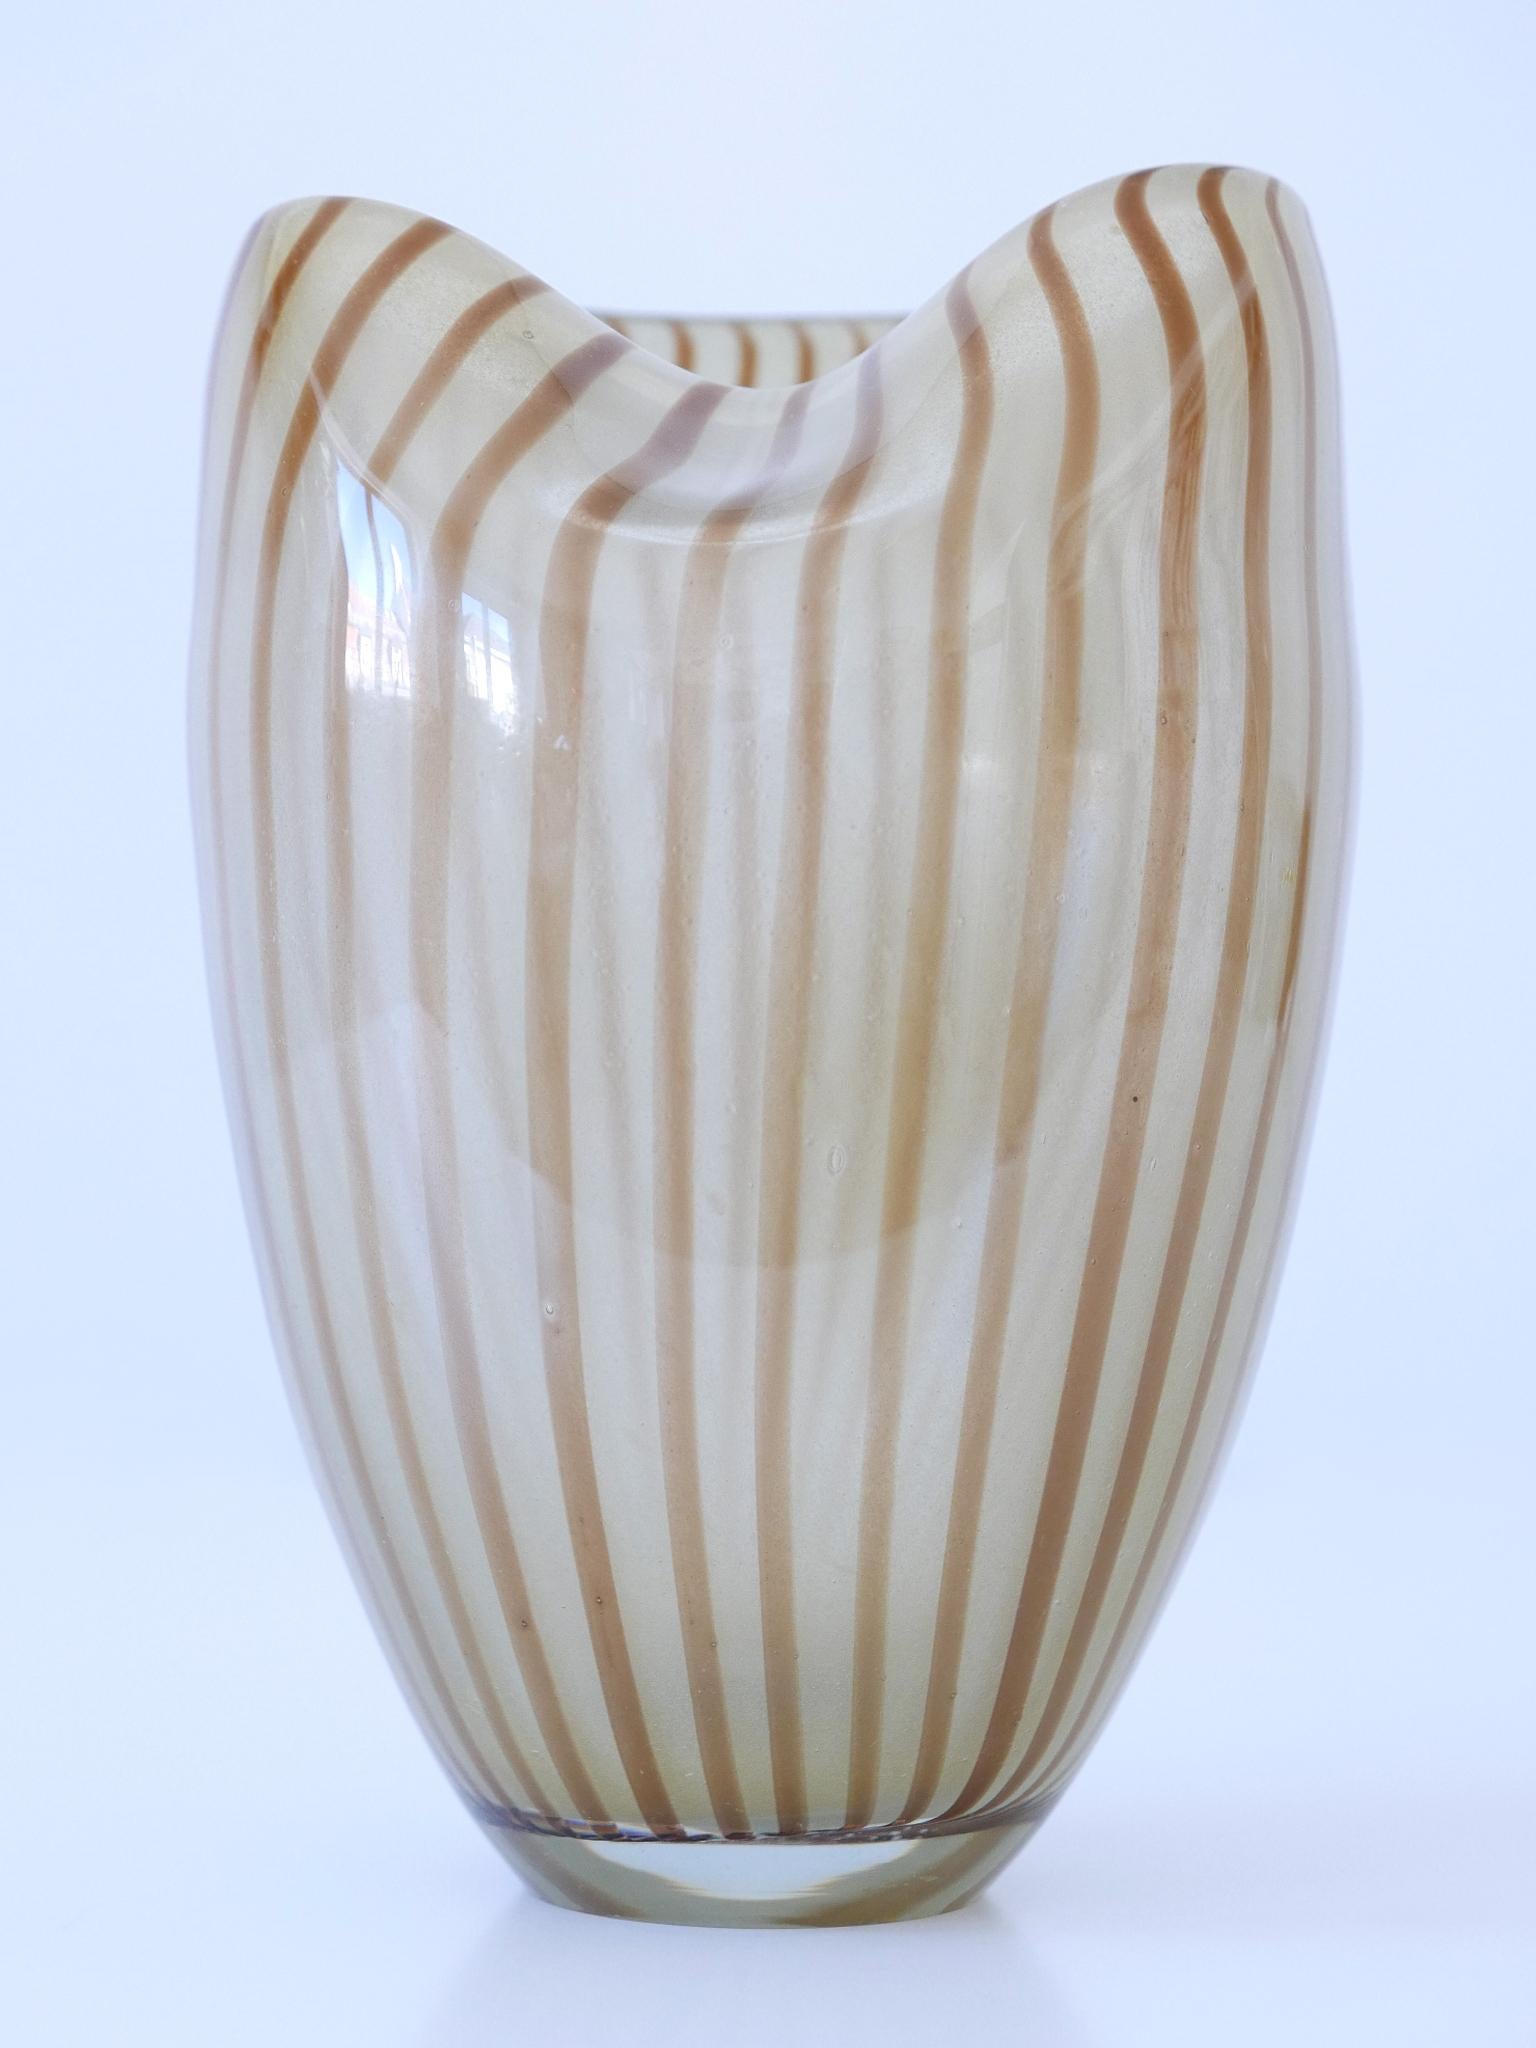 Elegant and highly decorative Mid Century Modern Murano Glass vase with stripes. Made in Italy, 1960s.

Executed in thick hell brown and beige colored Murano-Glass.

Dimensions:
H 9.06 in. (23 cm)
Dm 6.3 in. (16 cm)

Weight: ca. 2.5